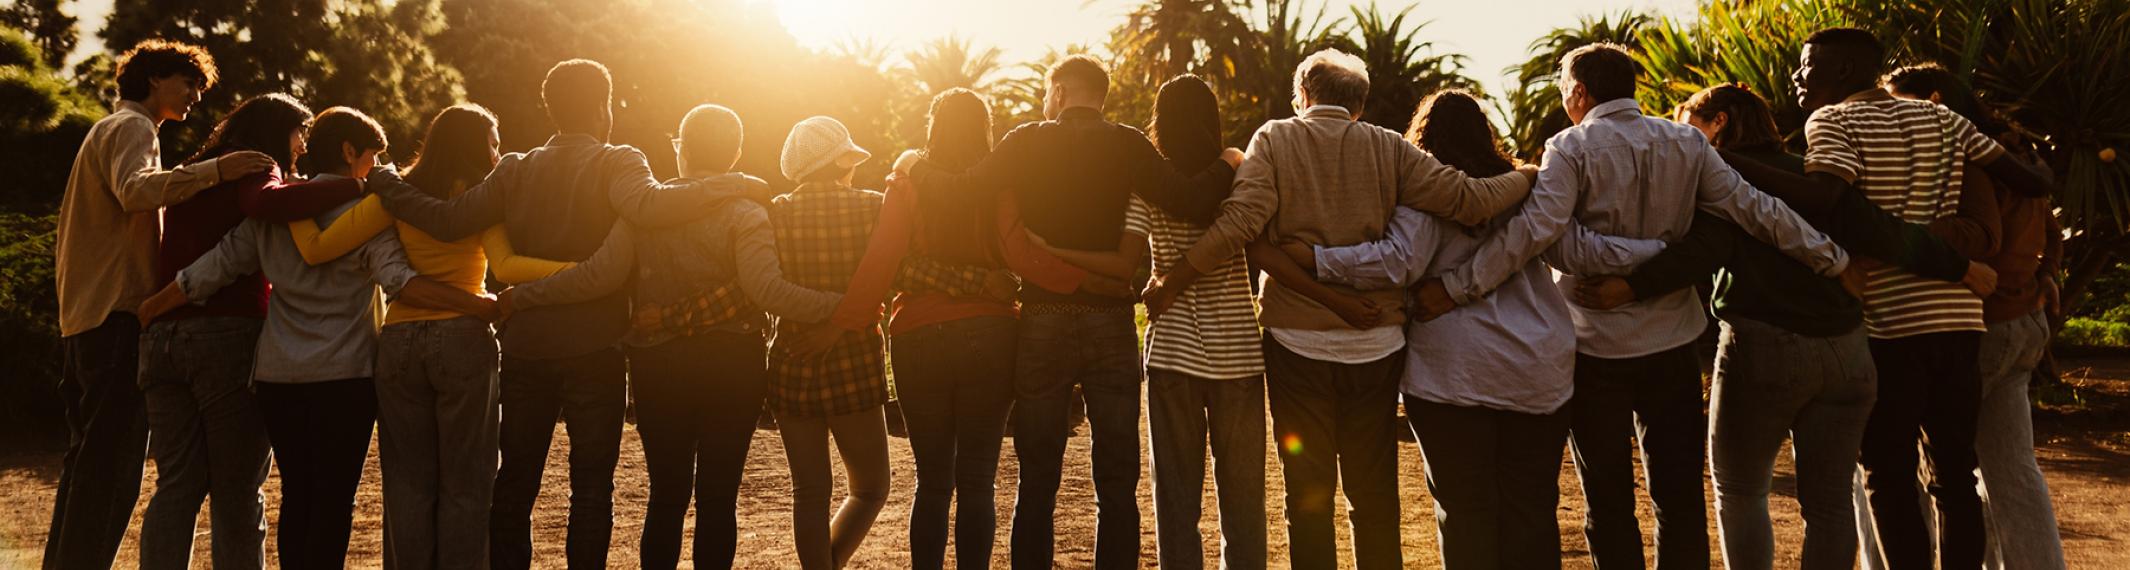 A diverse group of people linking arms at sunset